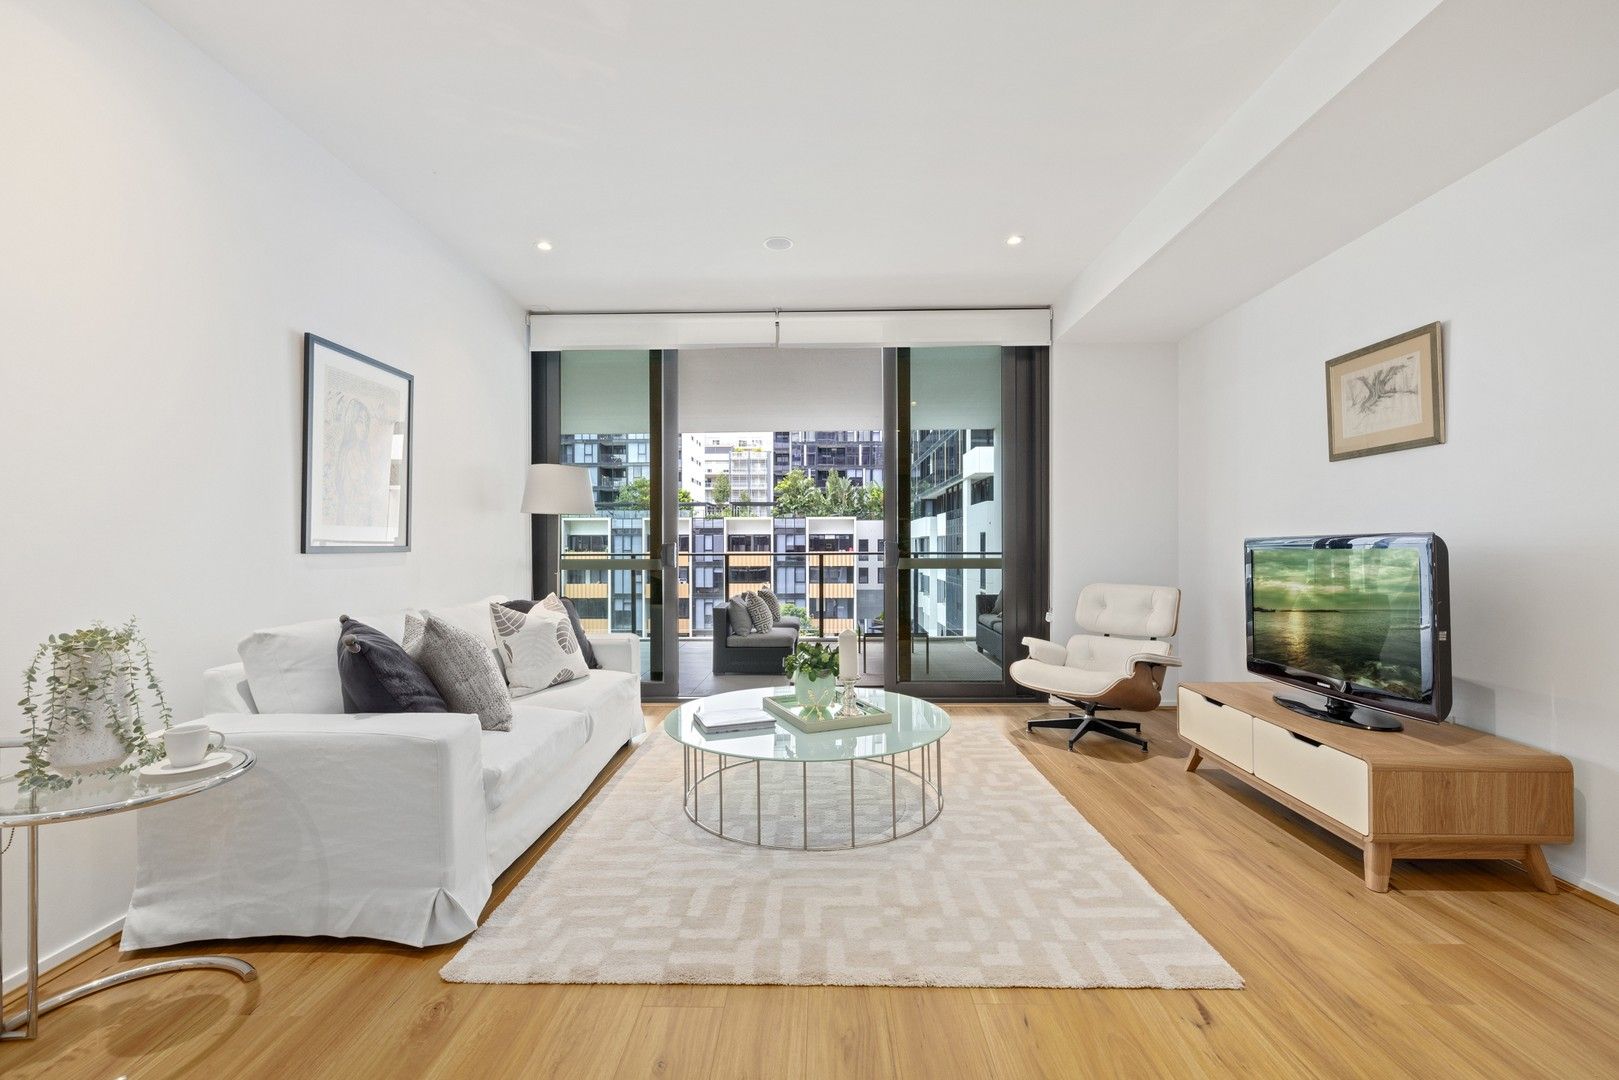 3 bedrooms Apartment / Unit / Flat in S308/6 Galloway Street MASCOT NSW, 2020